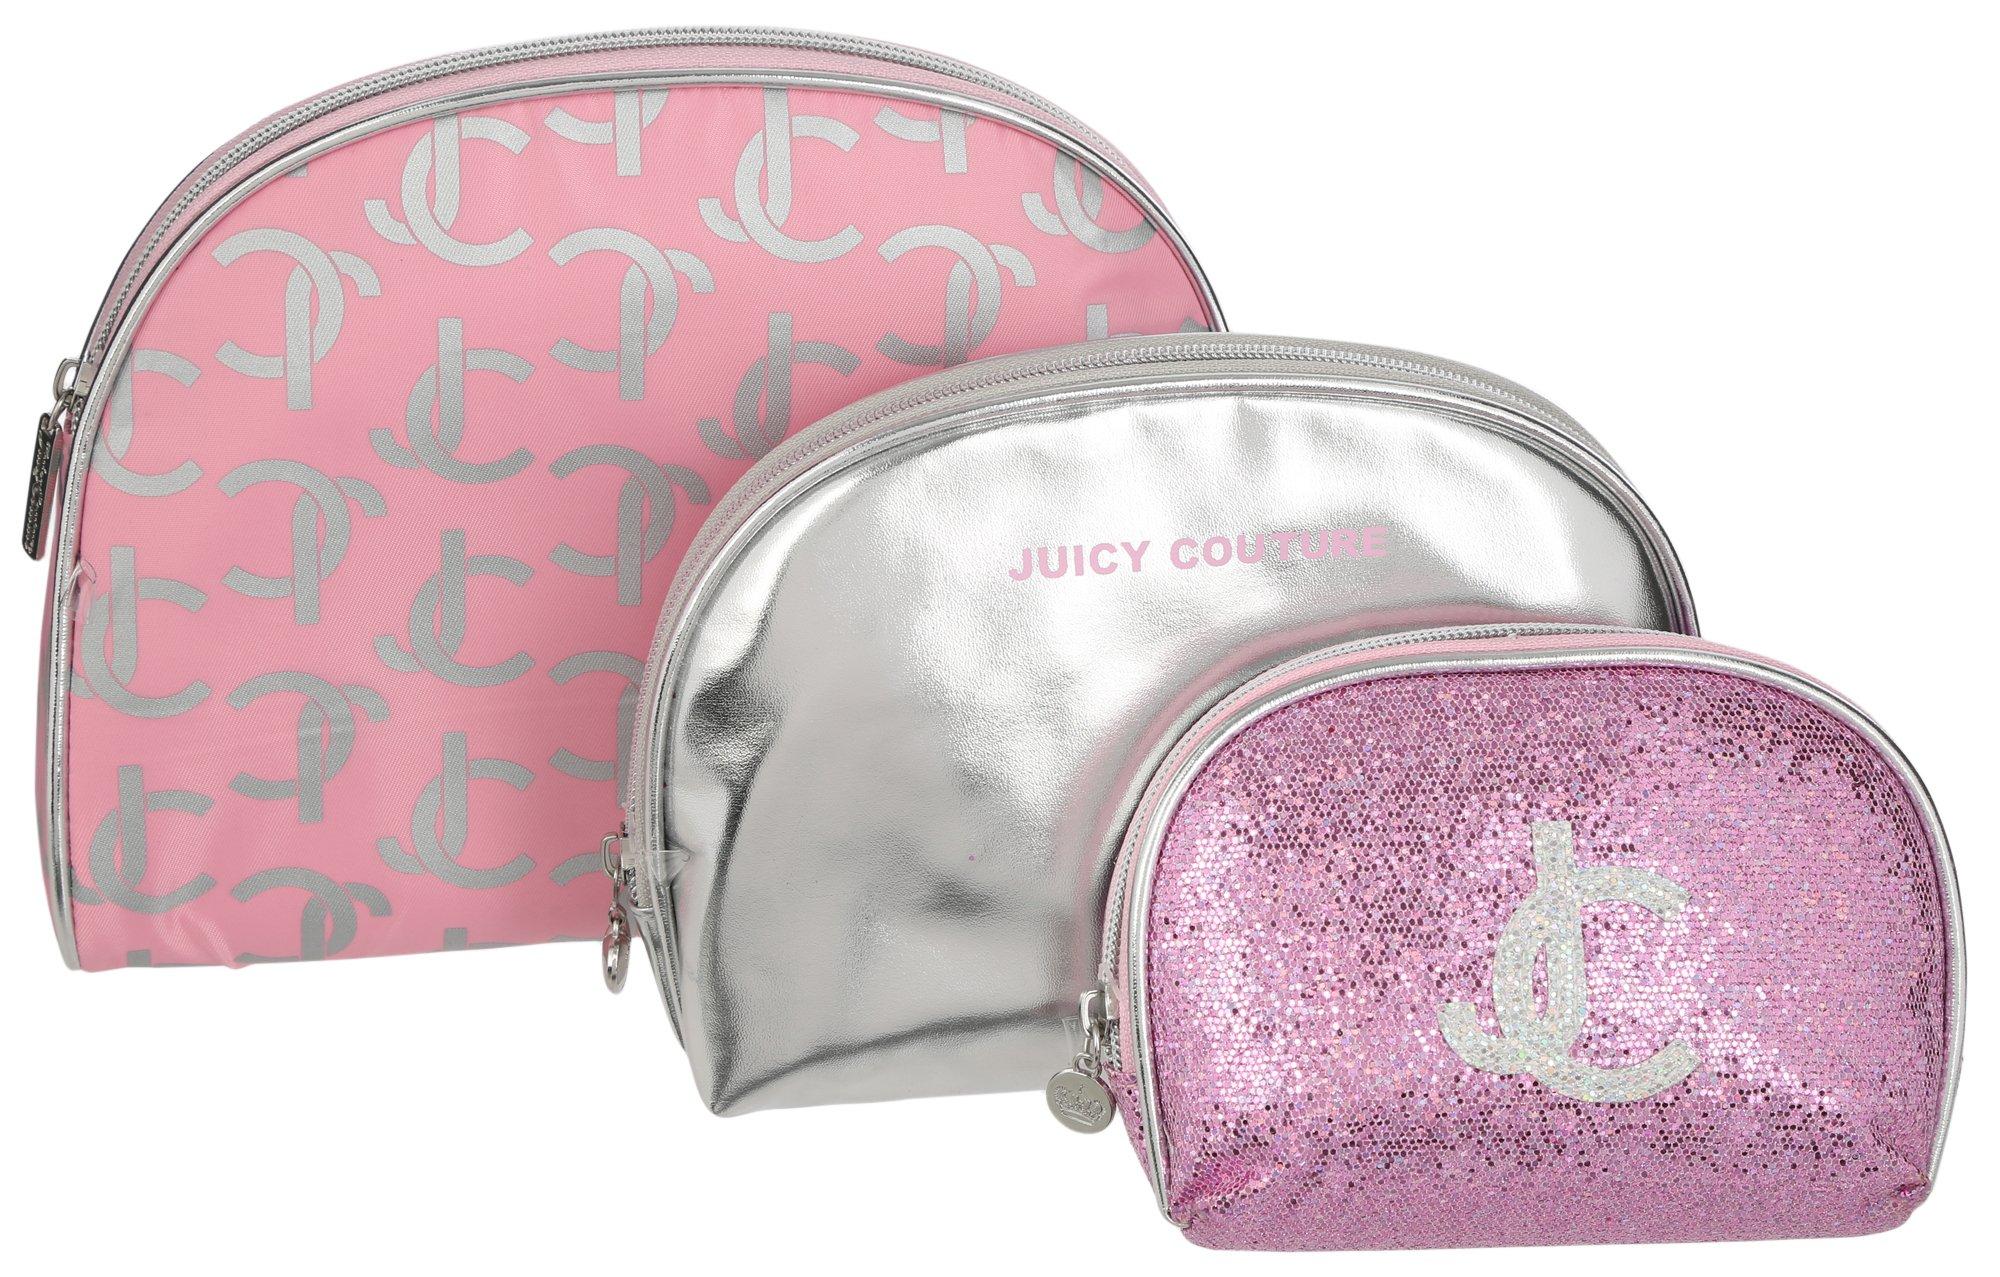 Juicy Couture 4-Pc. Cosmetic Cases & Travel Bottle